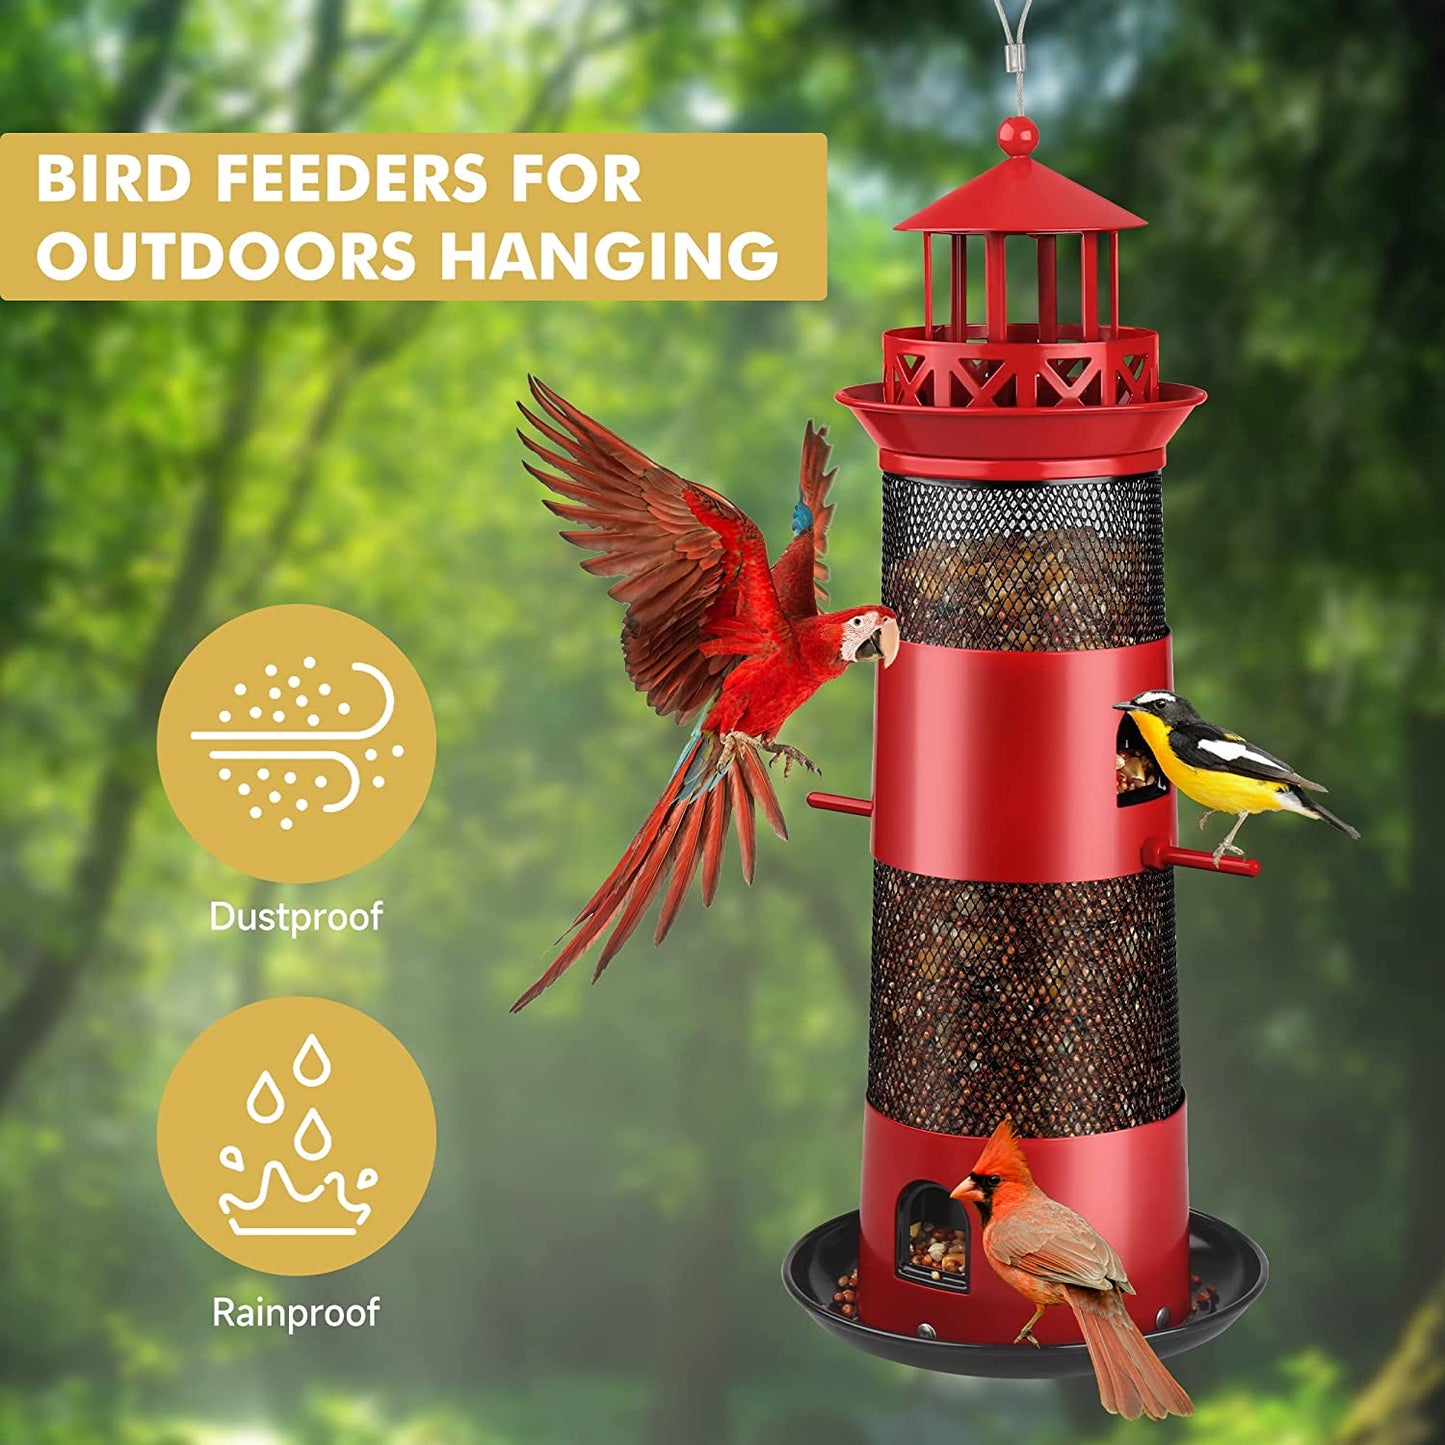 Bird Feeders for Outdoors Hanging, Squirrel Proof Wild Bird Feeder for Outside, Metal Bird Seed Feeder for Small Birds, 4 Lbs Large Capacity for Cardinal, Finch, Sparrow, Blue Jay.